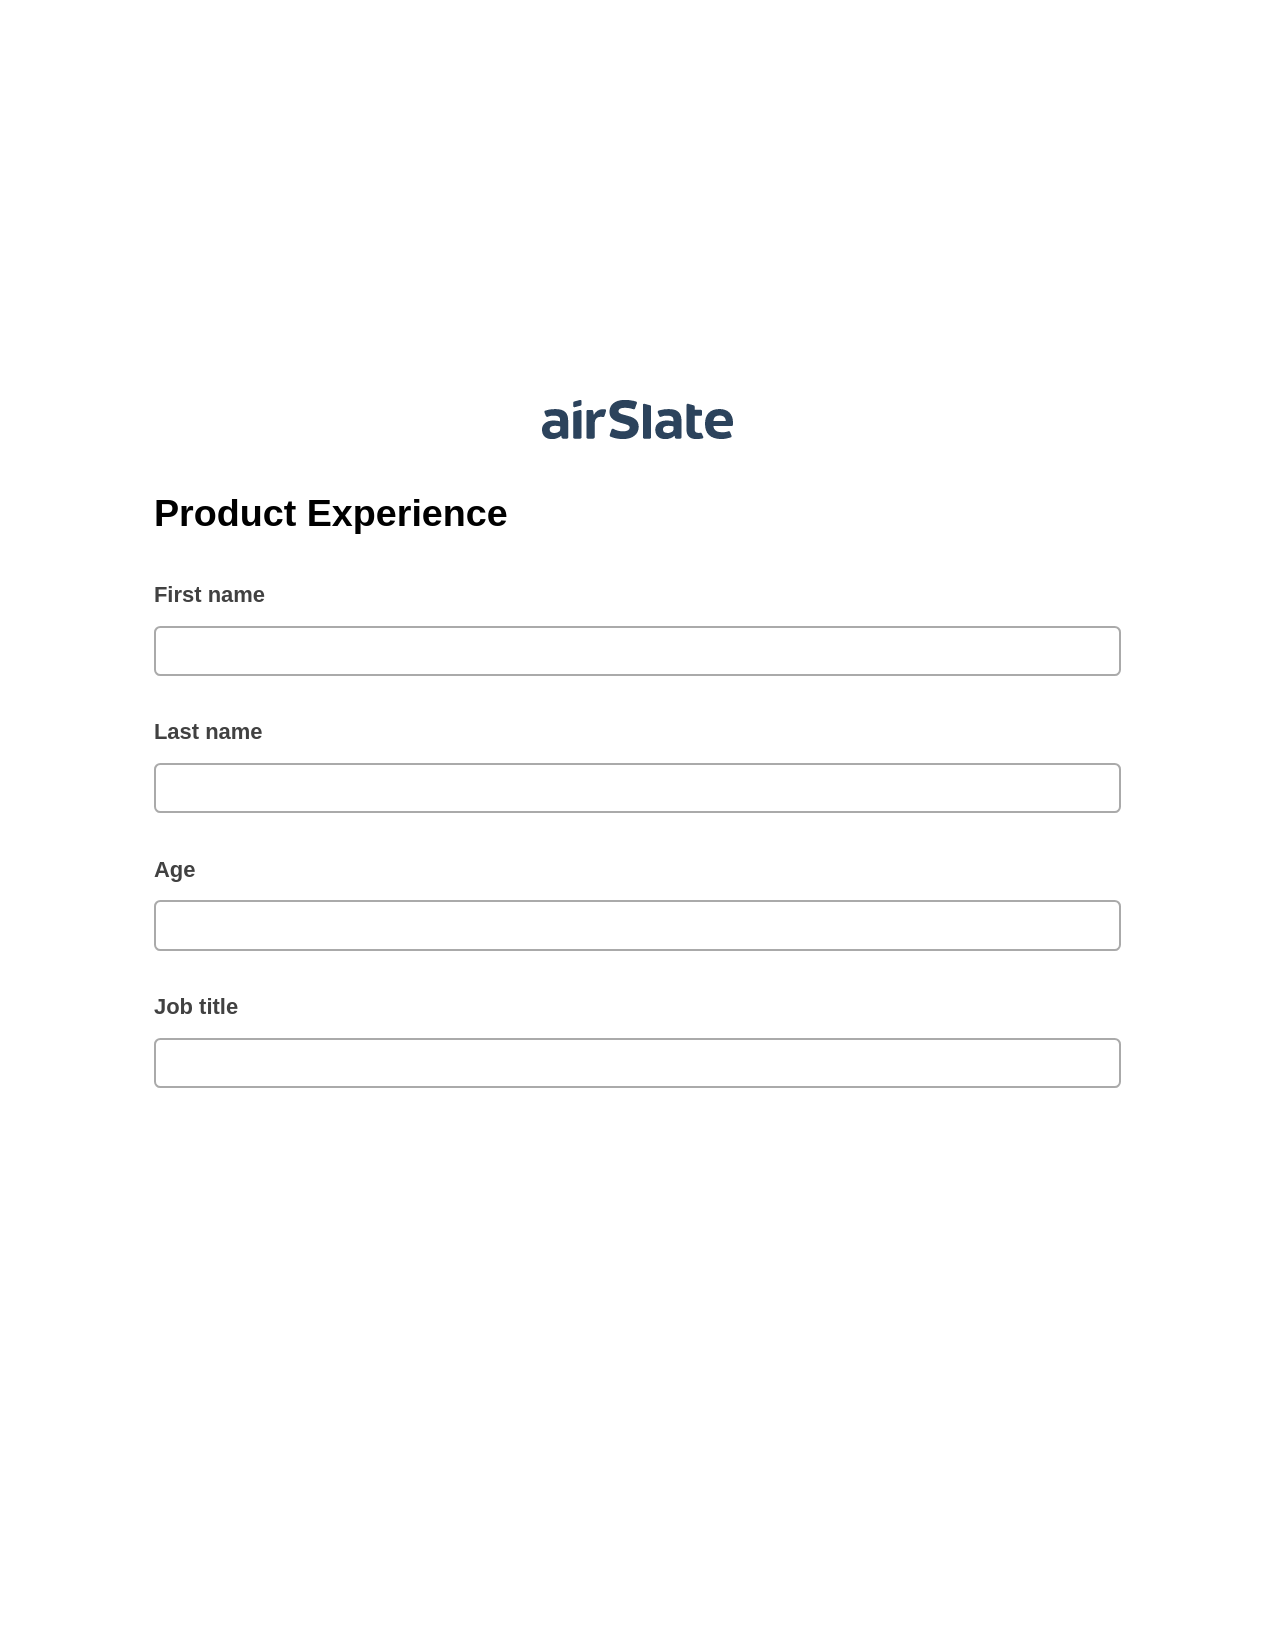 Product Experience Pre-fill Document Bot, Send a Slate with Roles Bot, Slack Notification Postfinish Bot